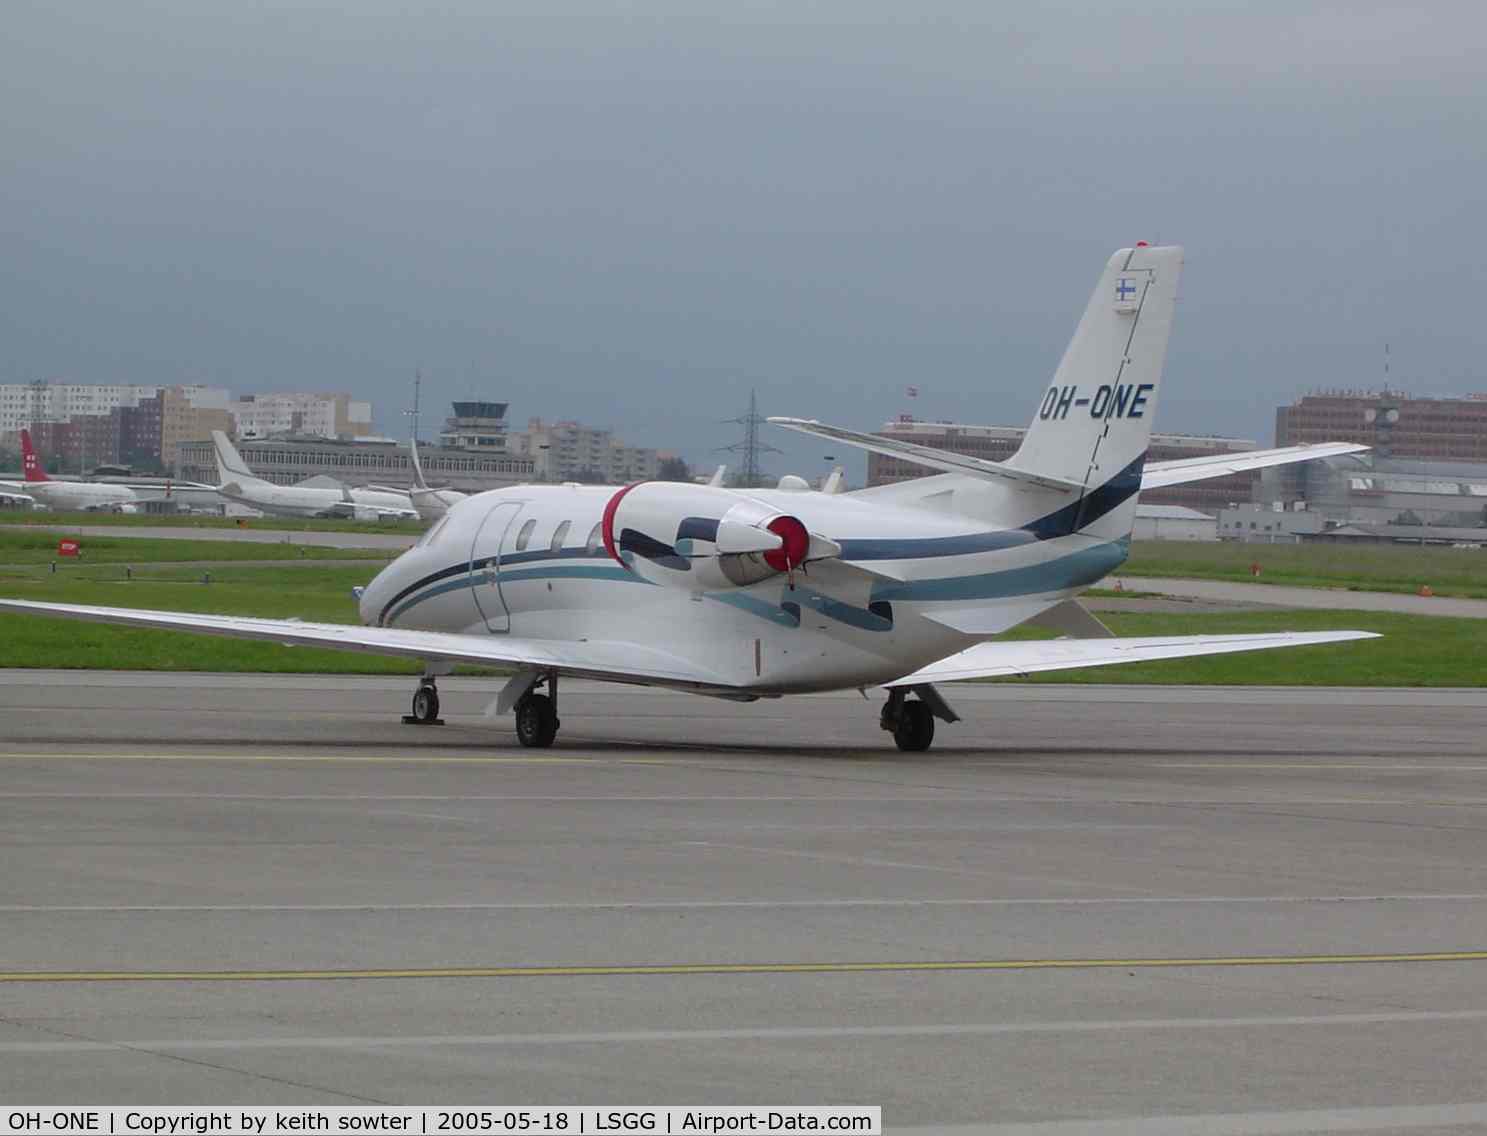 OH-ONE, 2001 Cessna 560XL Citation Excel C/N 560-5157, Visitor for the EBACE show